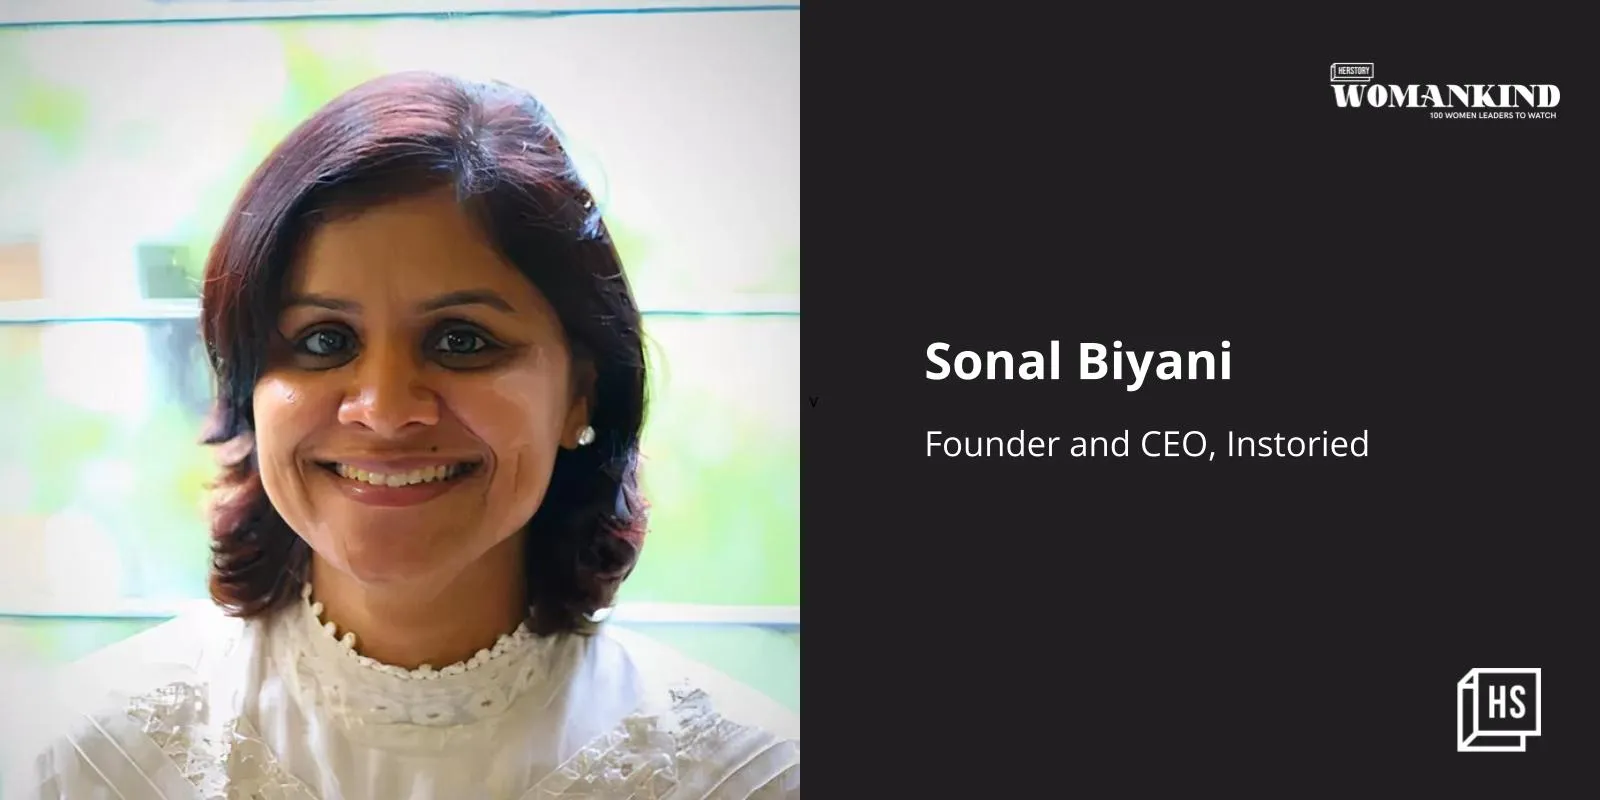 [100 Emerging Women Leaders] Meet Sonal Biyani, investment banker by day, comedian by night